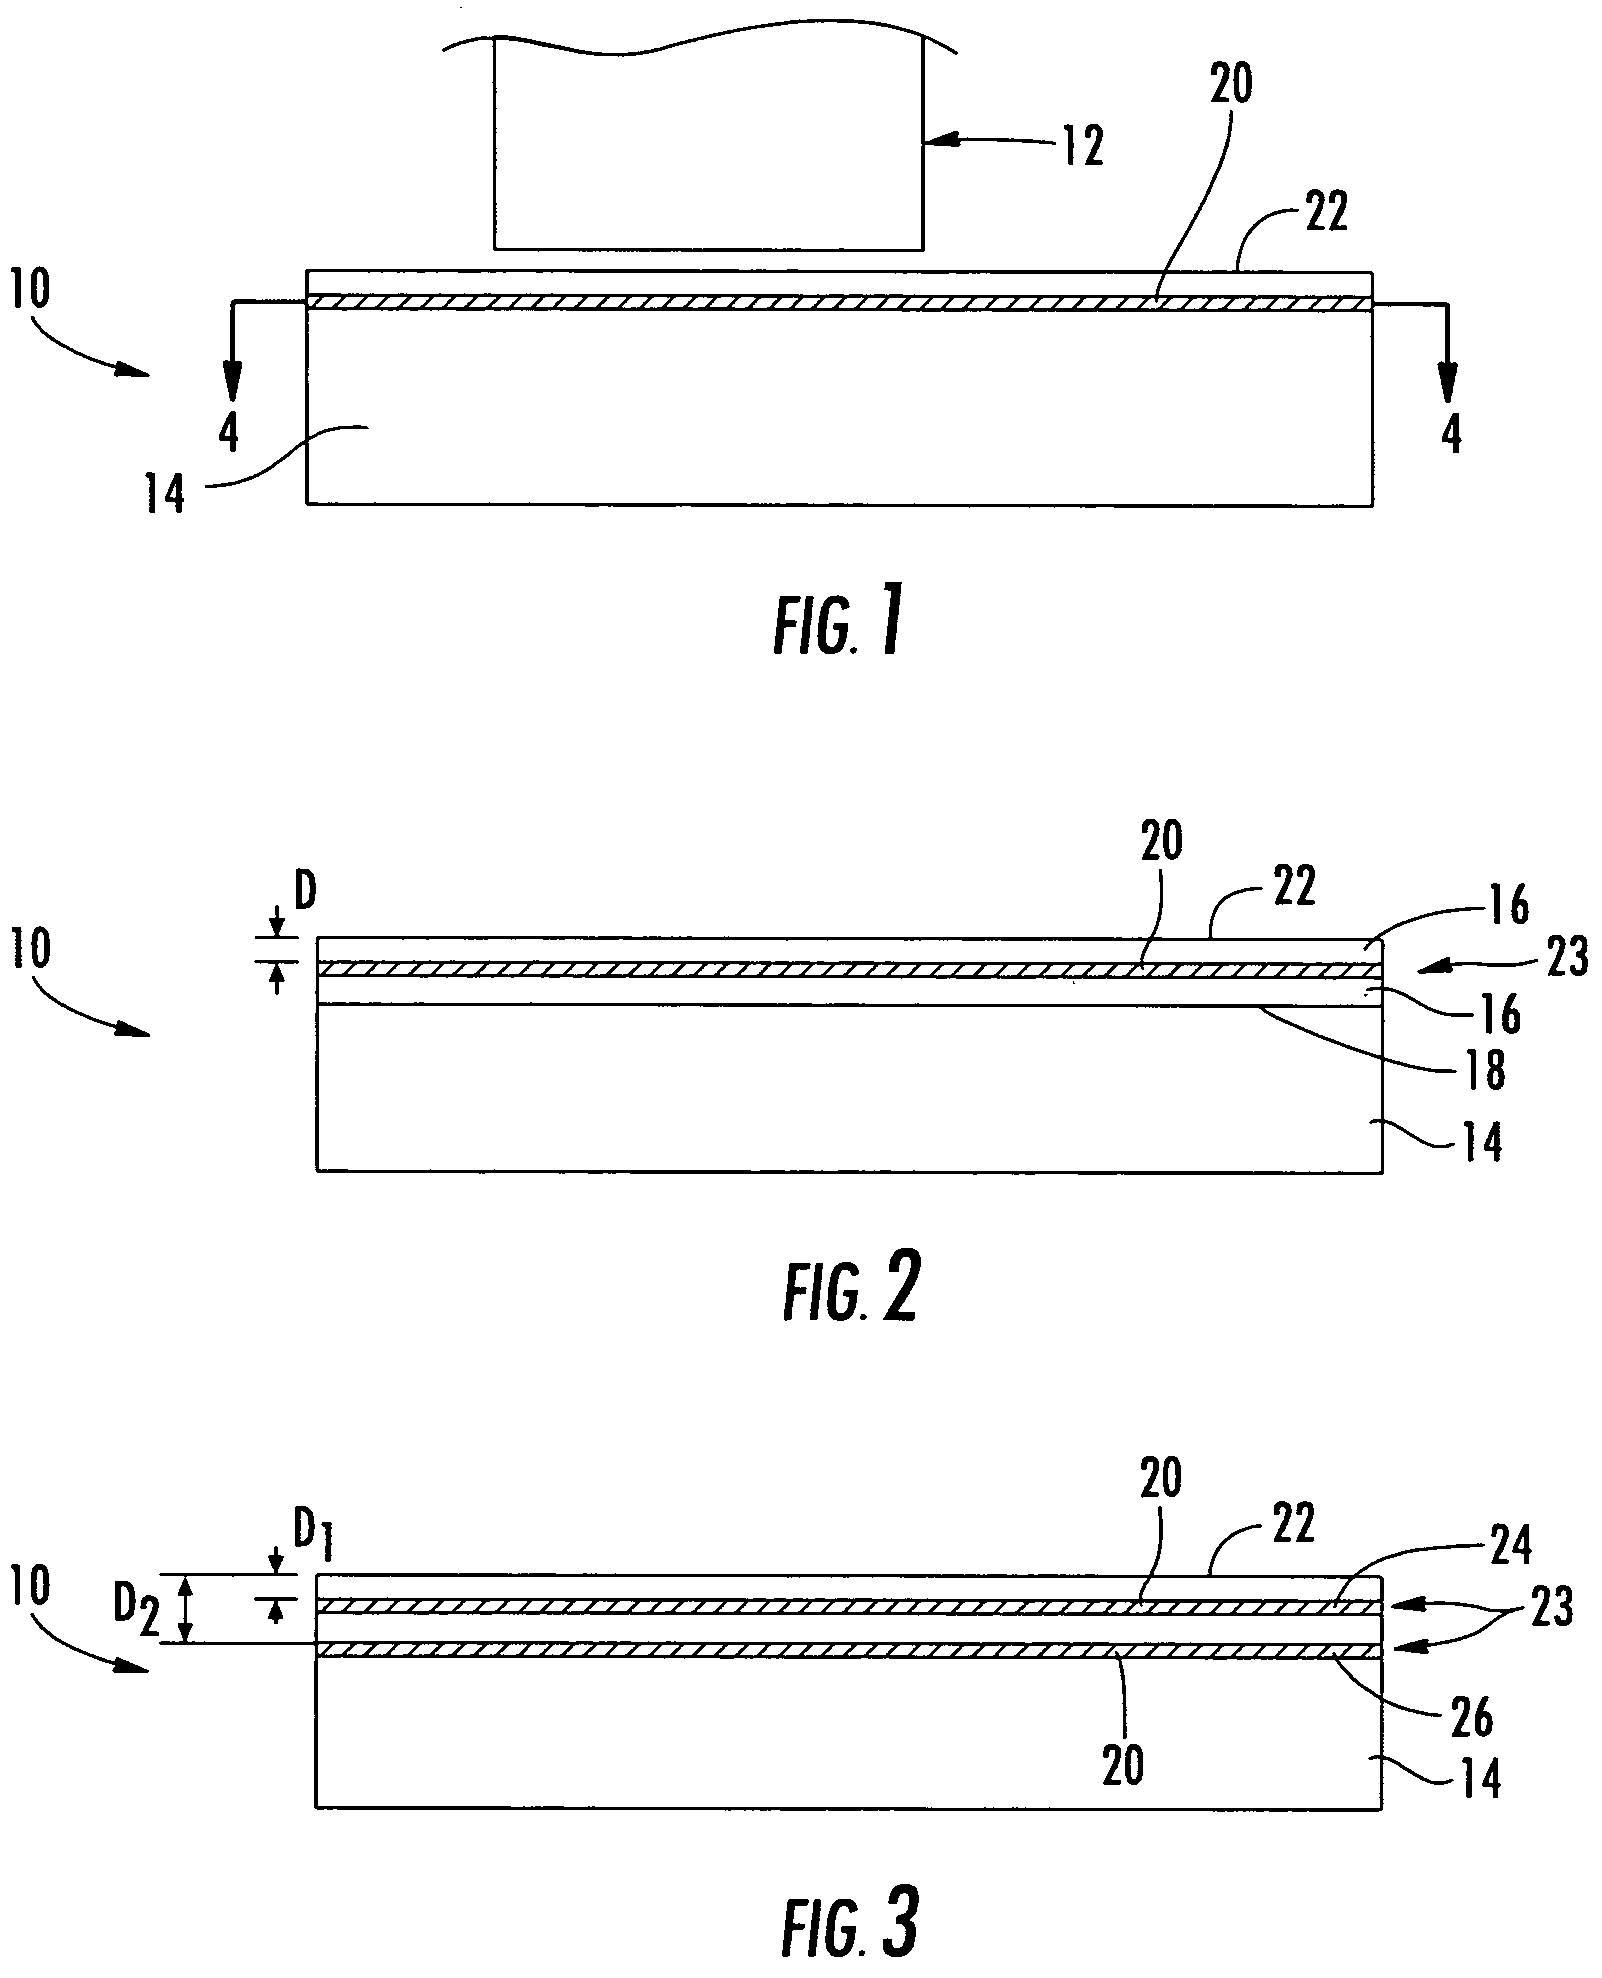 Wear monitoring system with embedded conductors